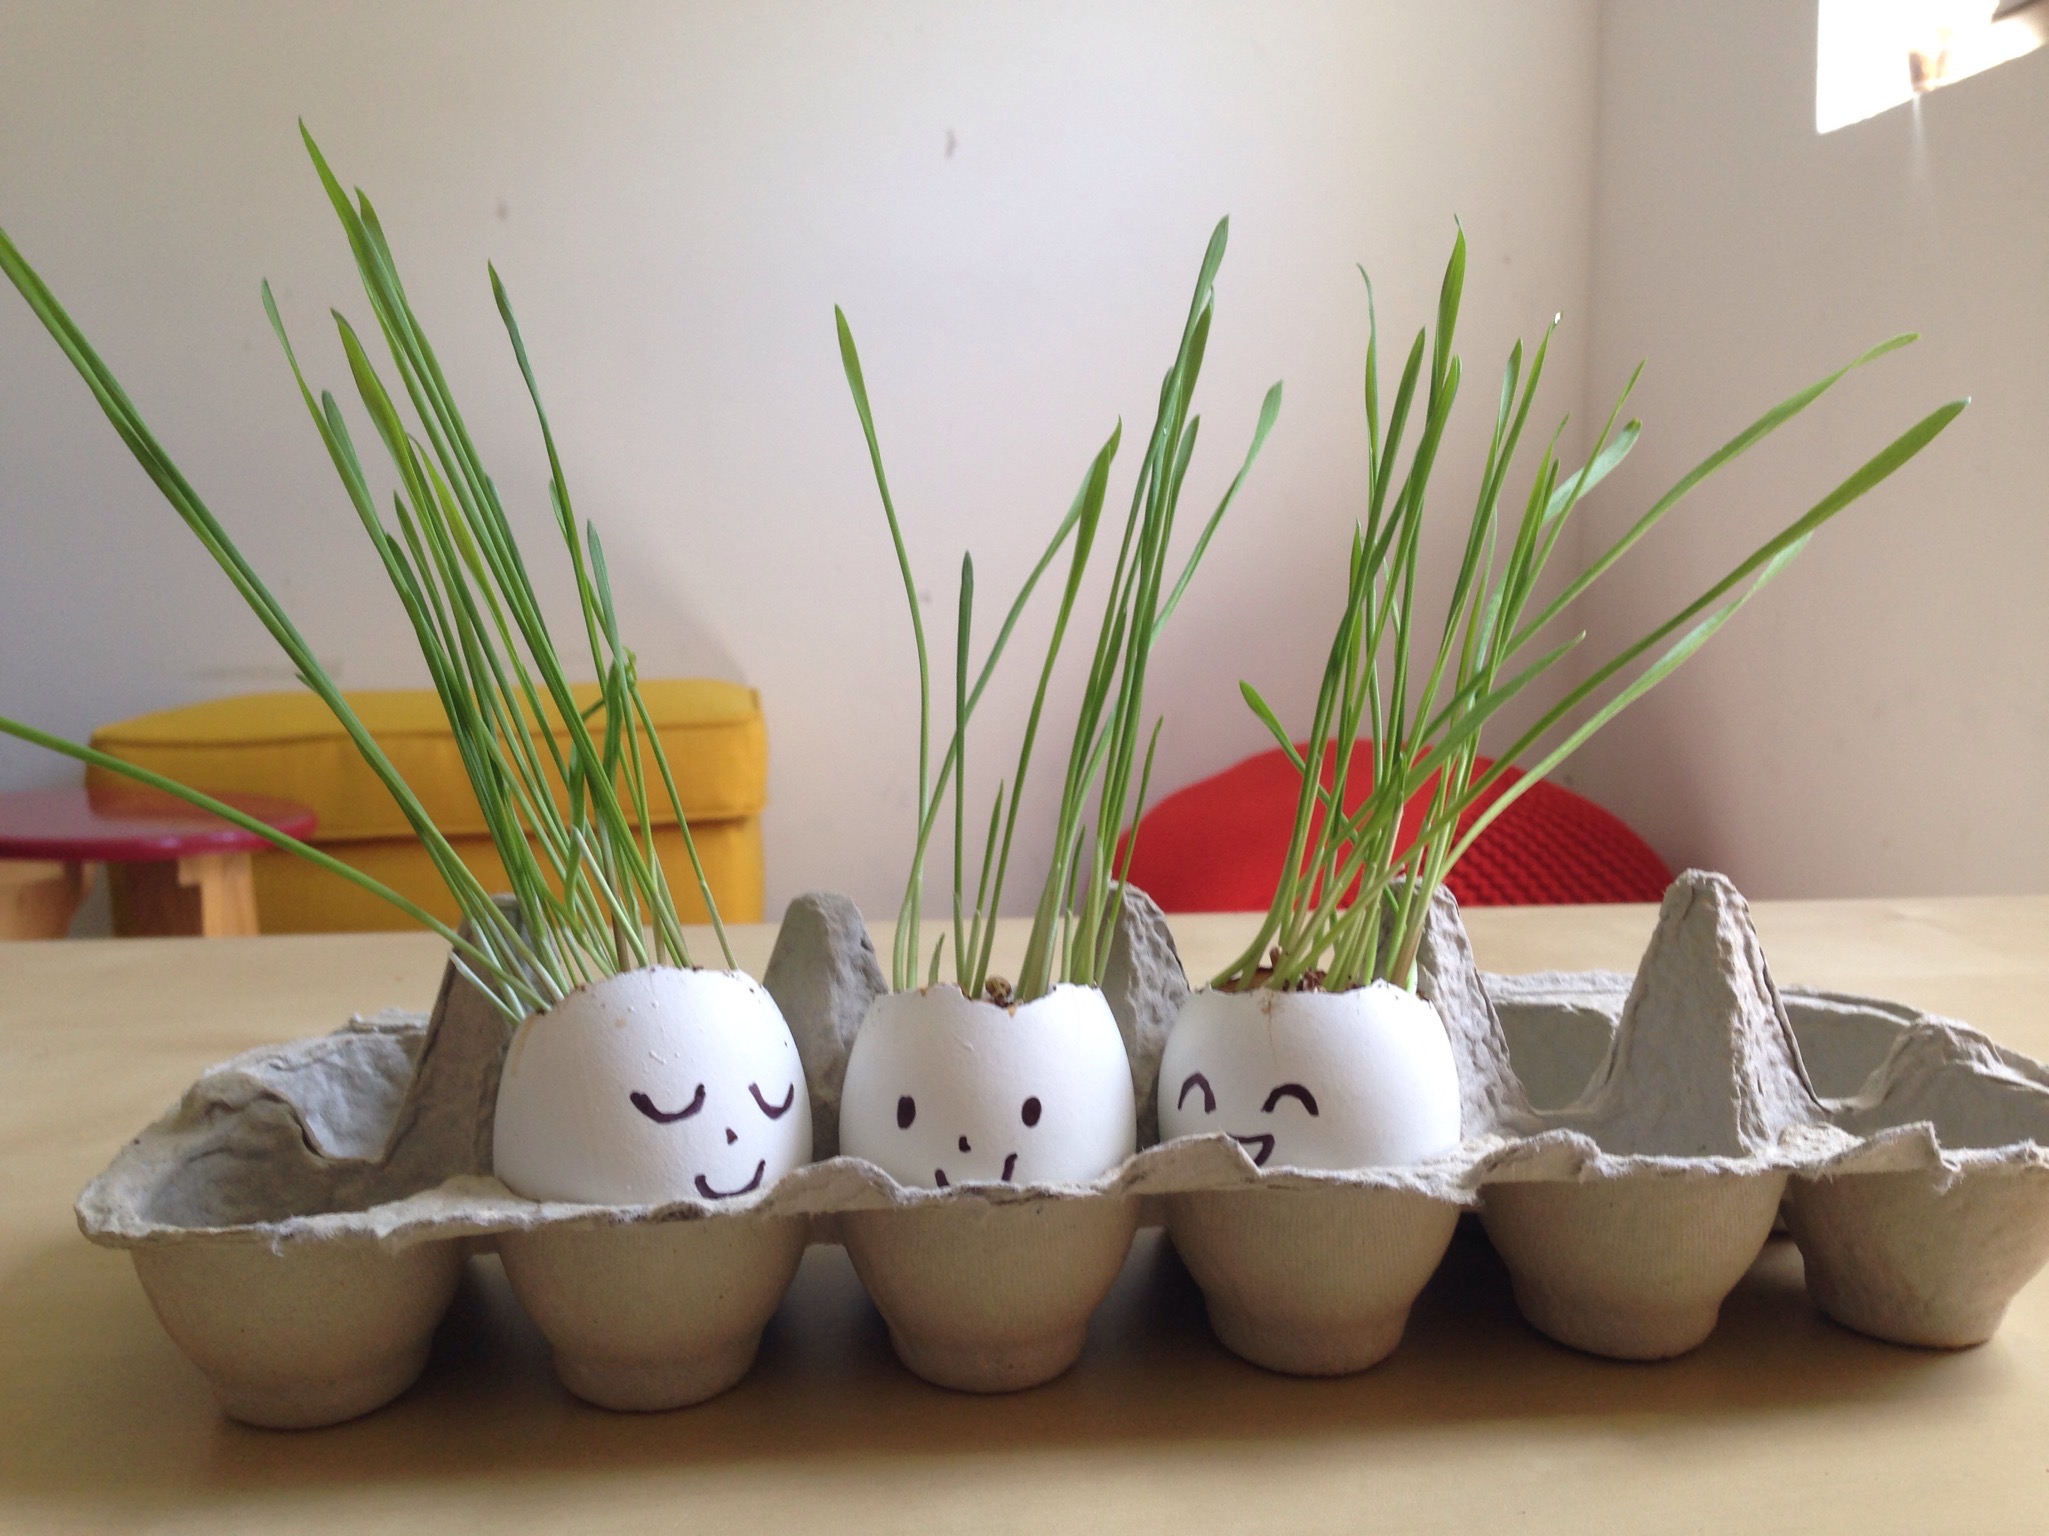 Egg Grass Heads: A craft your kids will GROW wild for! - Mother Natured